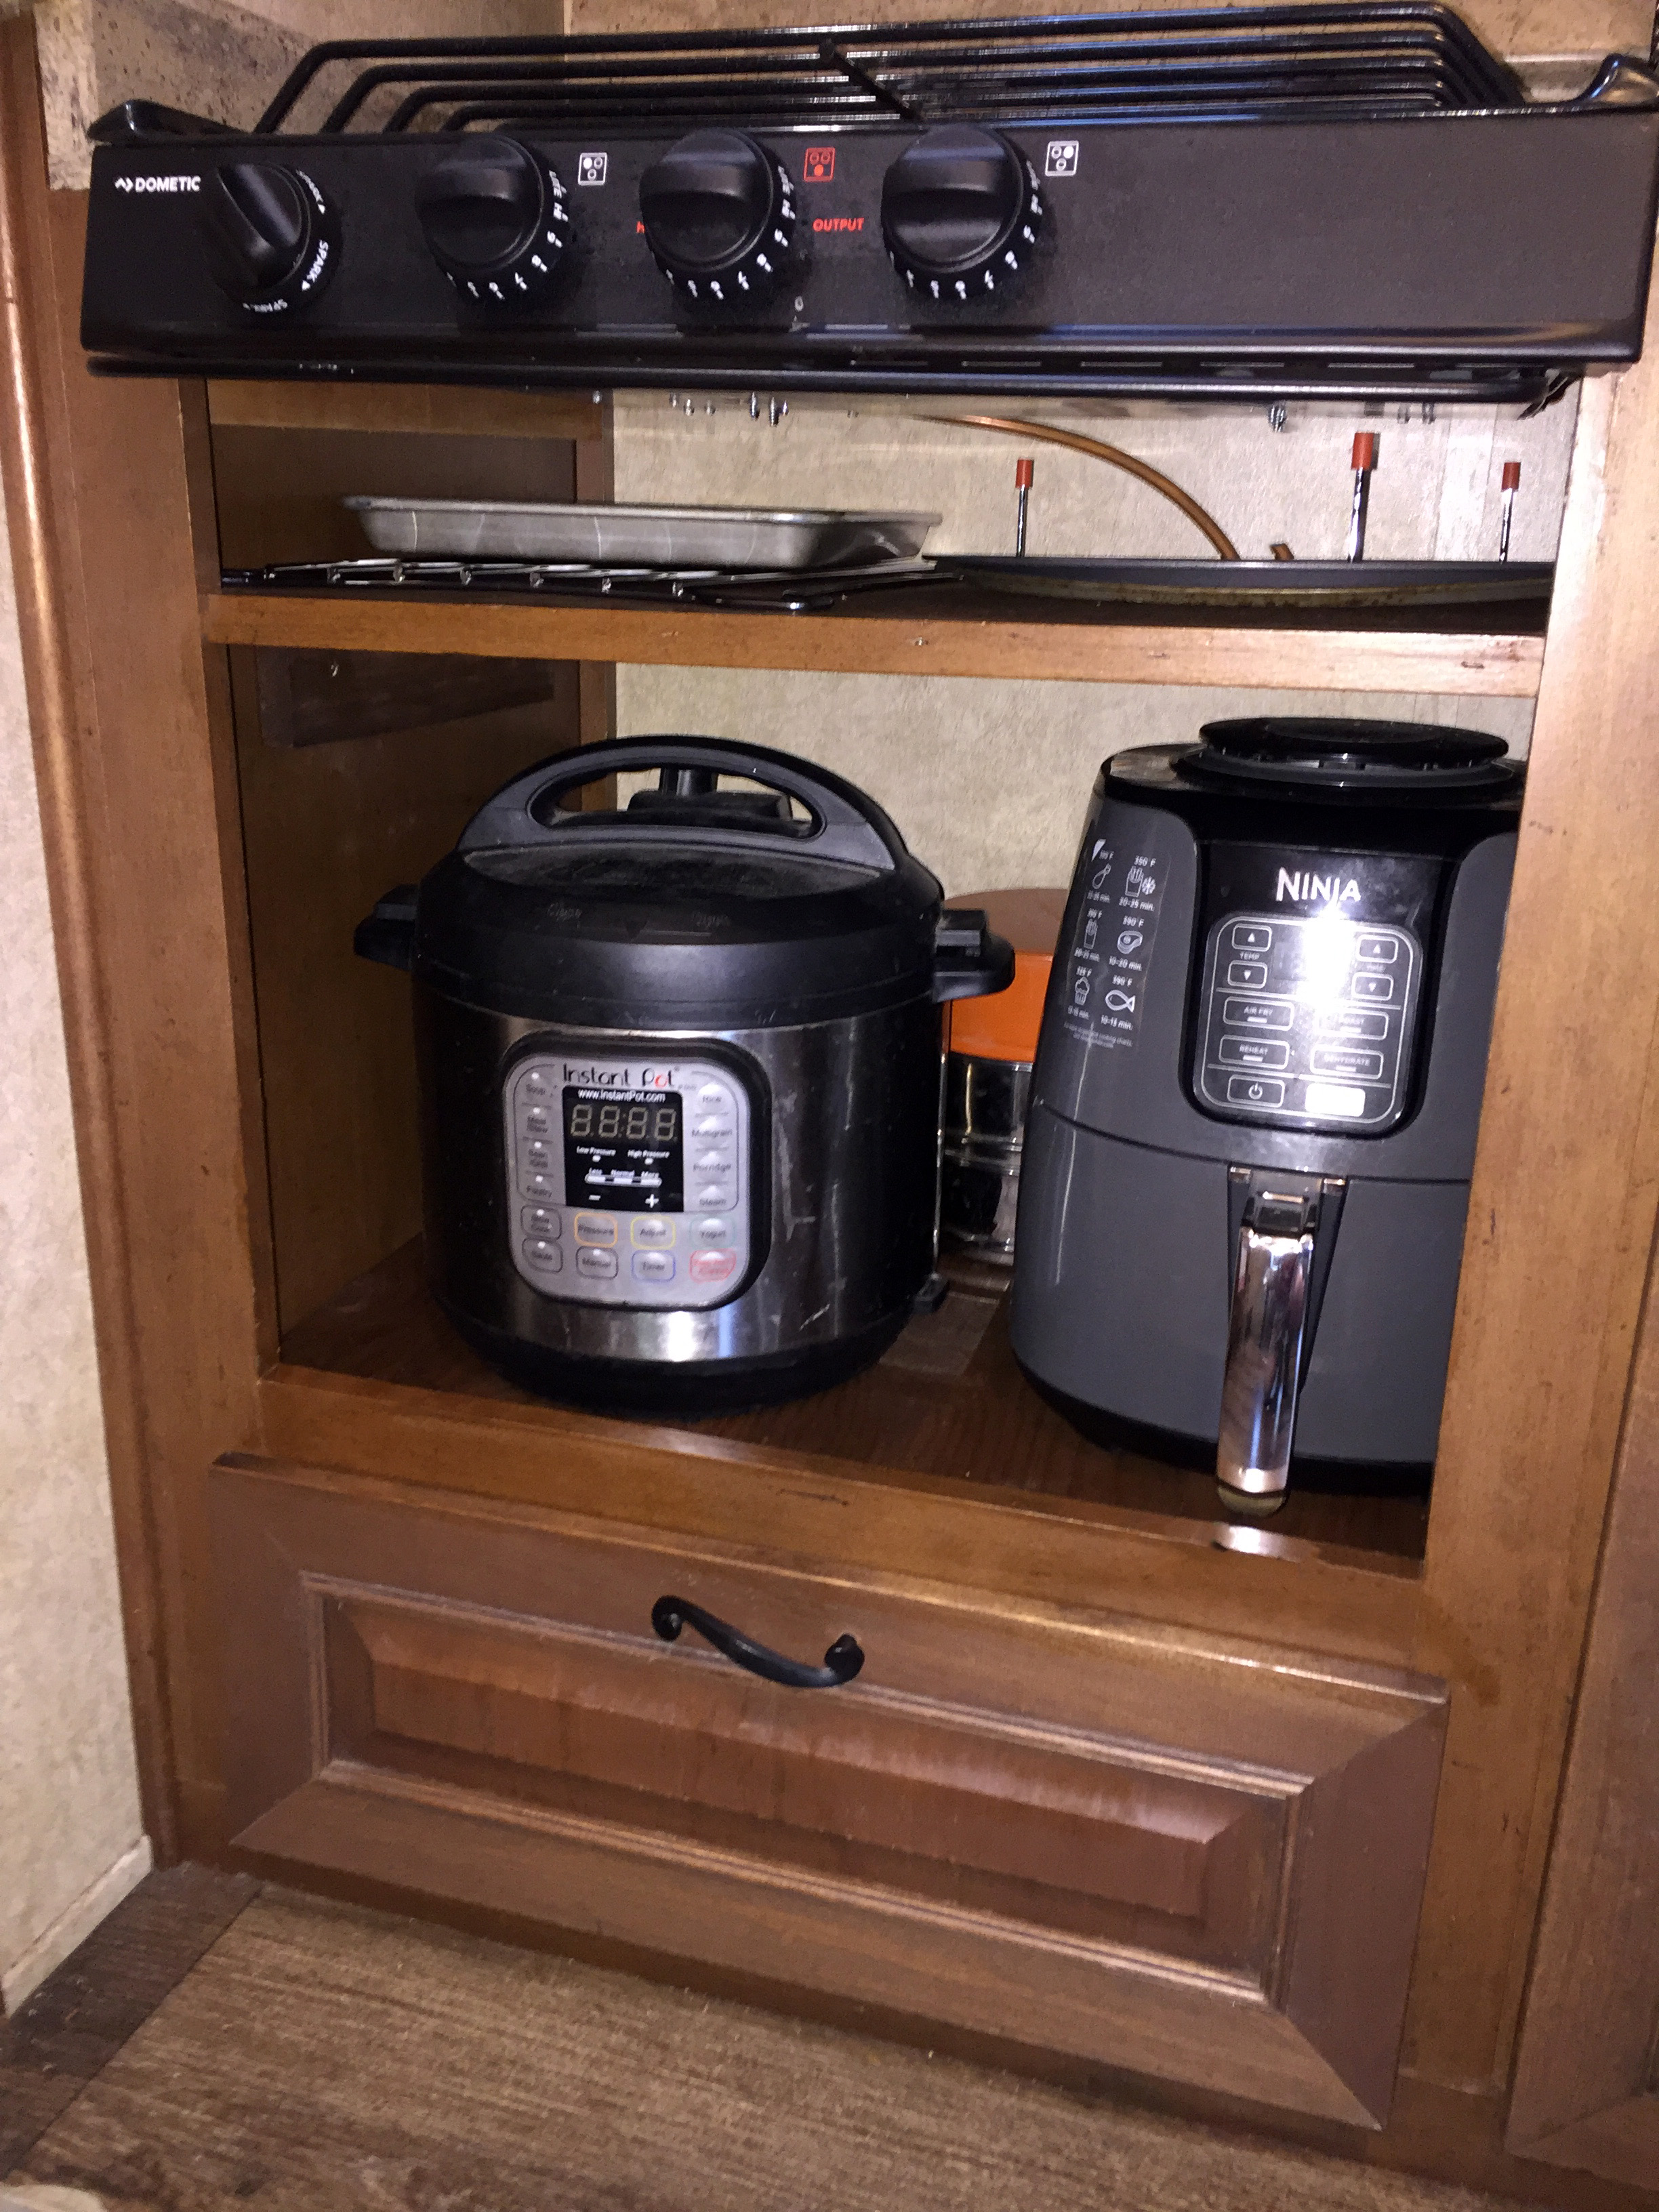 Removing the RV Stove and Creating a Cabinet